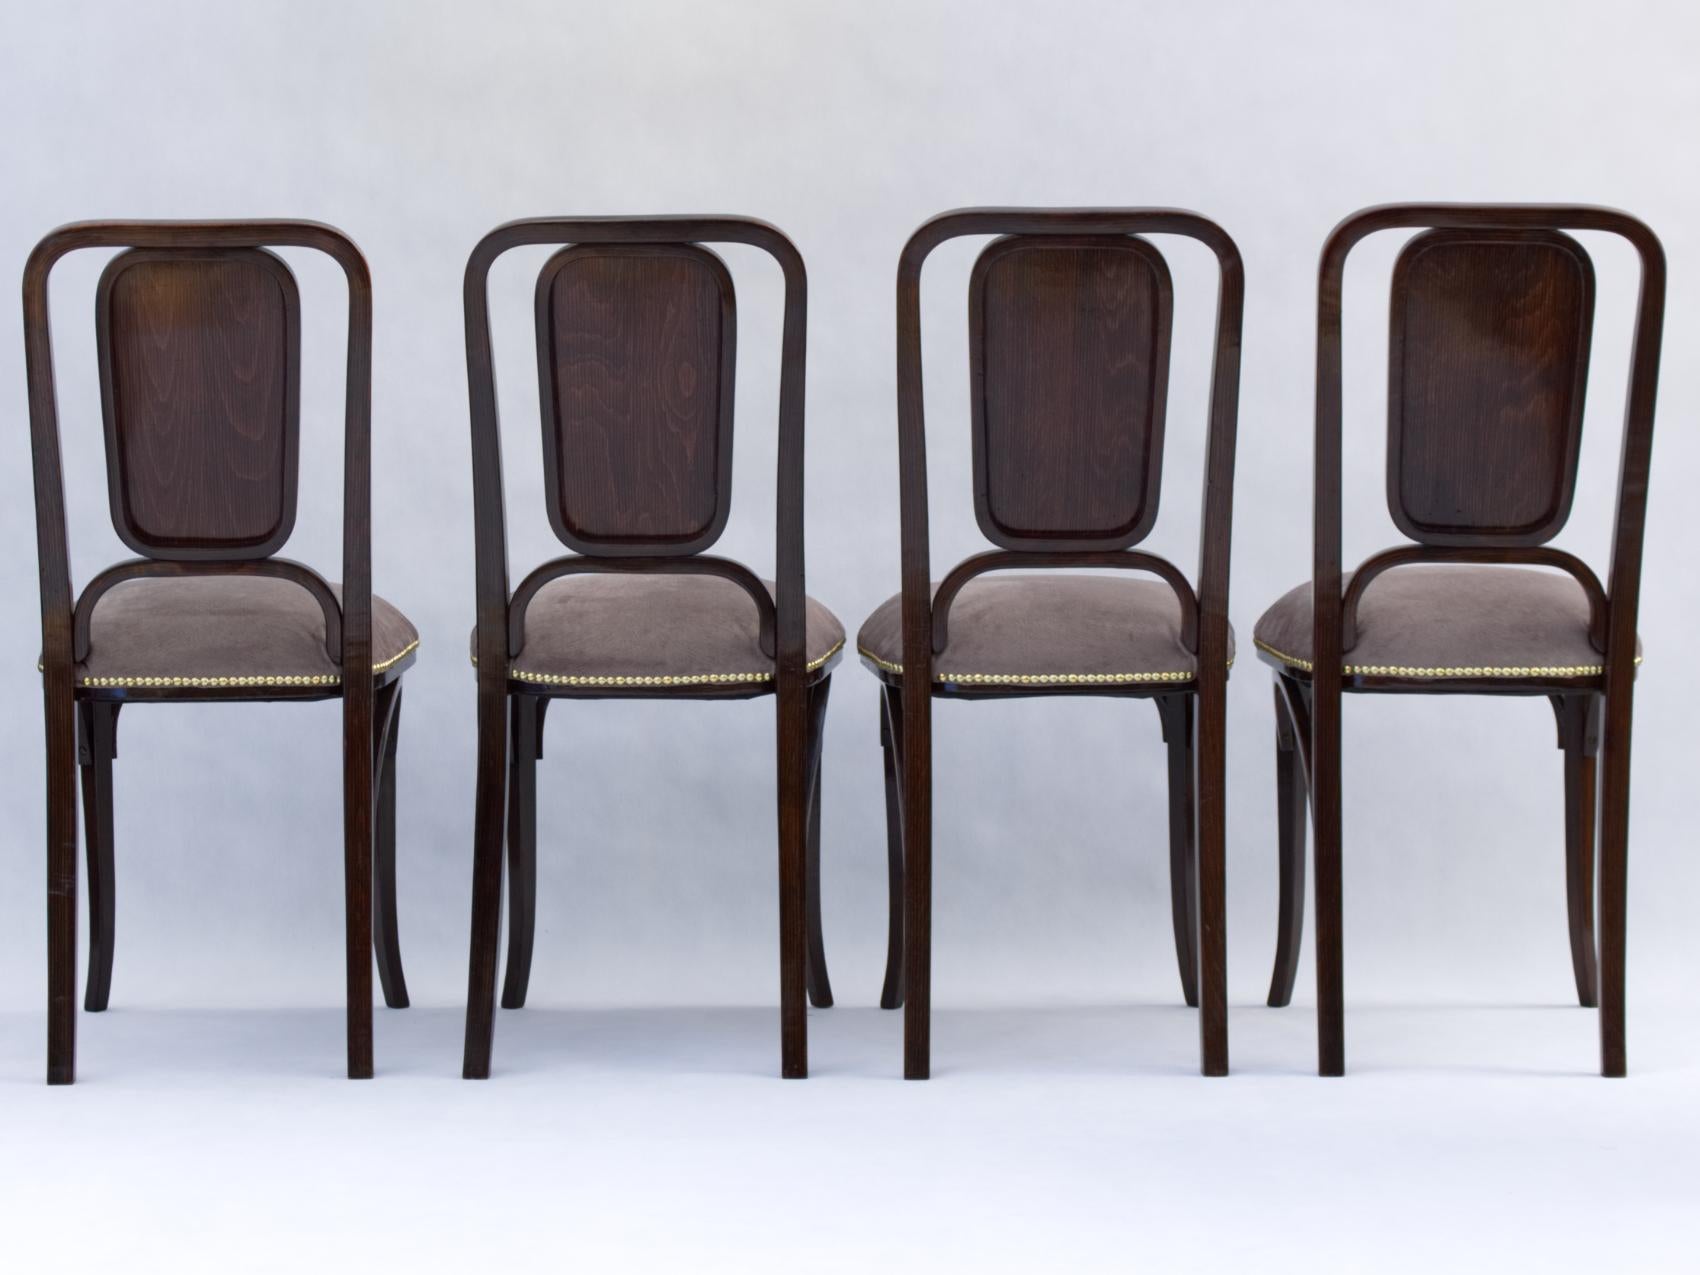 Early 20th Century Art Nouveau Bentwood Chairs by Thonet circa 1905, Set of 4